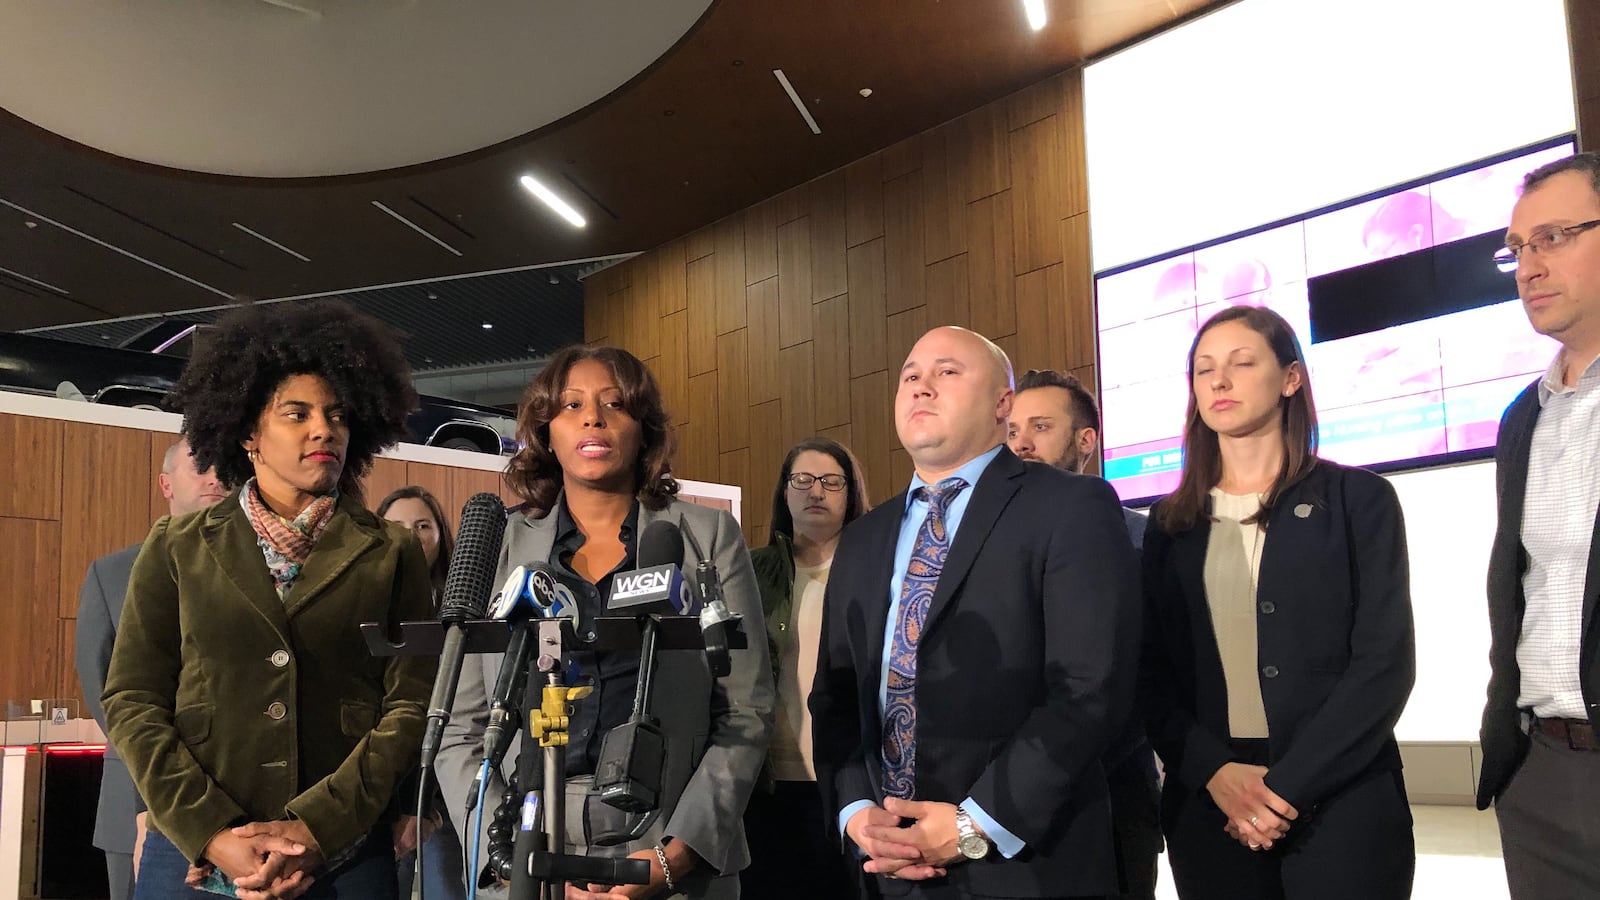 Chicago's Deputy Mayor Sybil Madison, left, Chicago Public Schools Chief Education Officer LaTanya McDade, and the school district's Chief Operating Officer Arnie Rivera, joined by members of the Chicago Public Schools bargaining team, talked with reporters after negotiations at 2:30  a.m. Oct 29, 2019, about progress in contract bargaining.